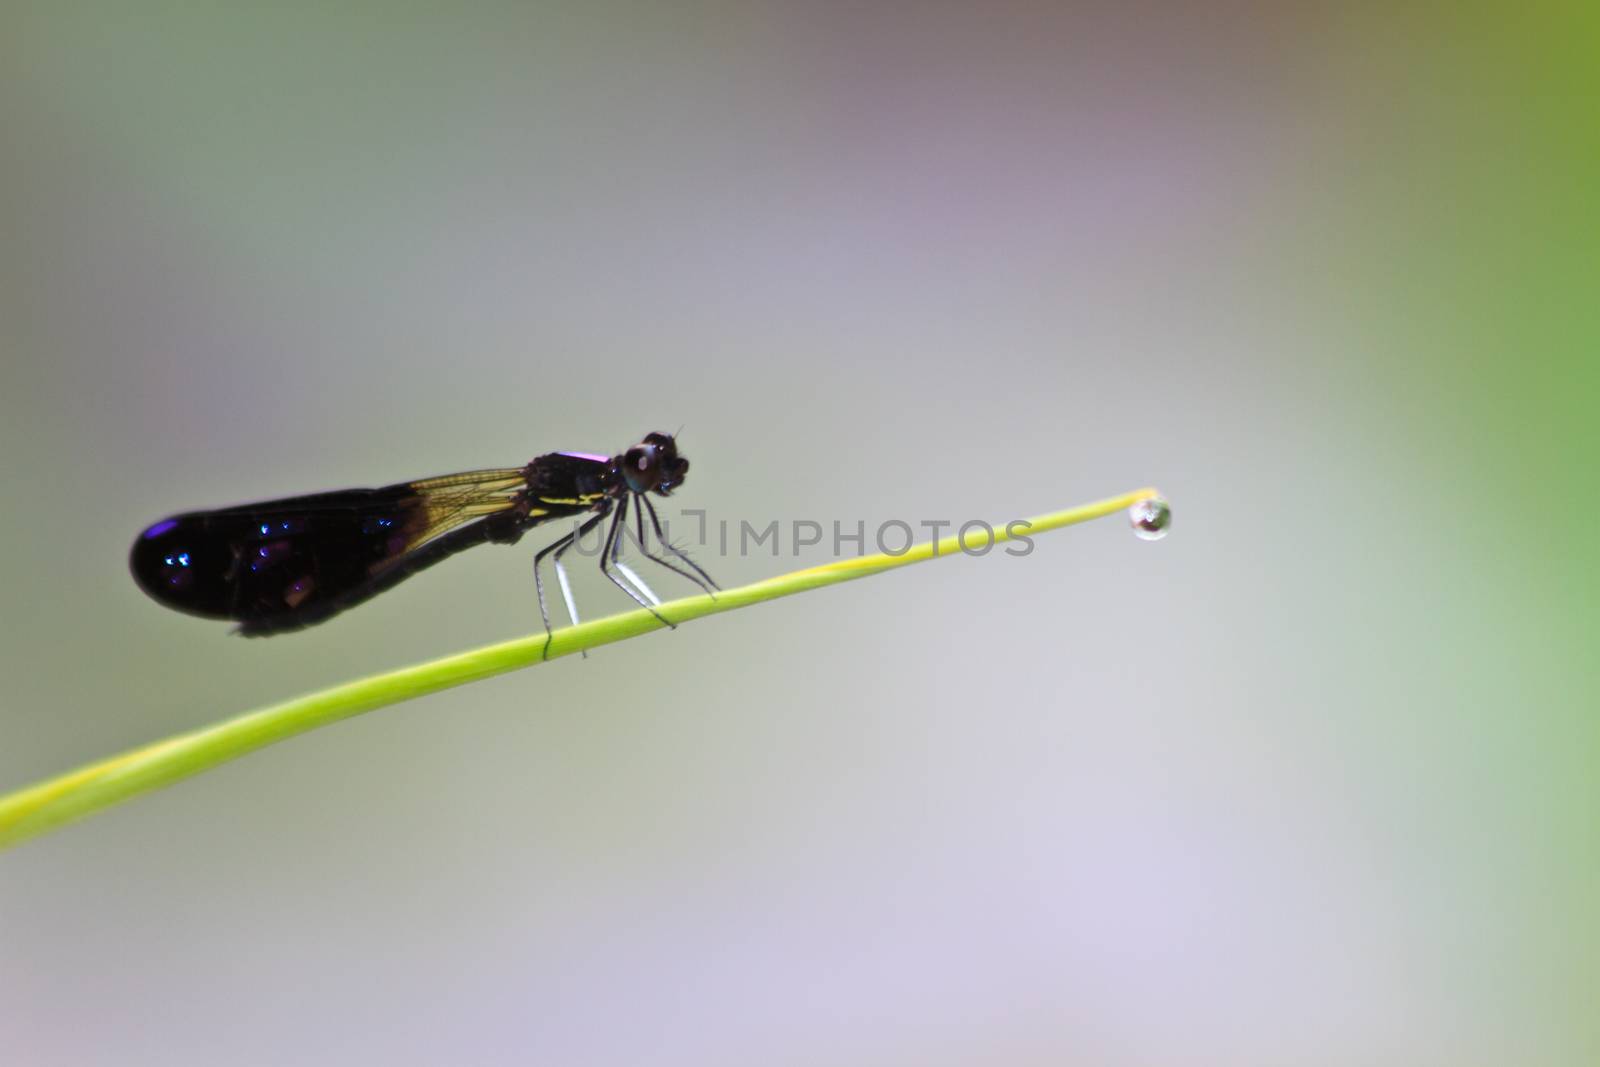 Dragonfly sitting on a branch of green grass with drop water